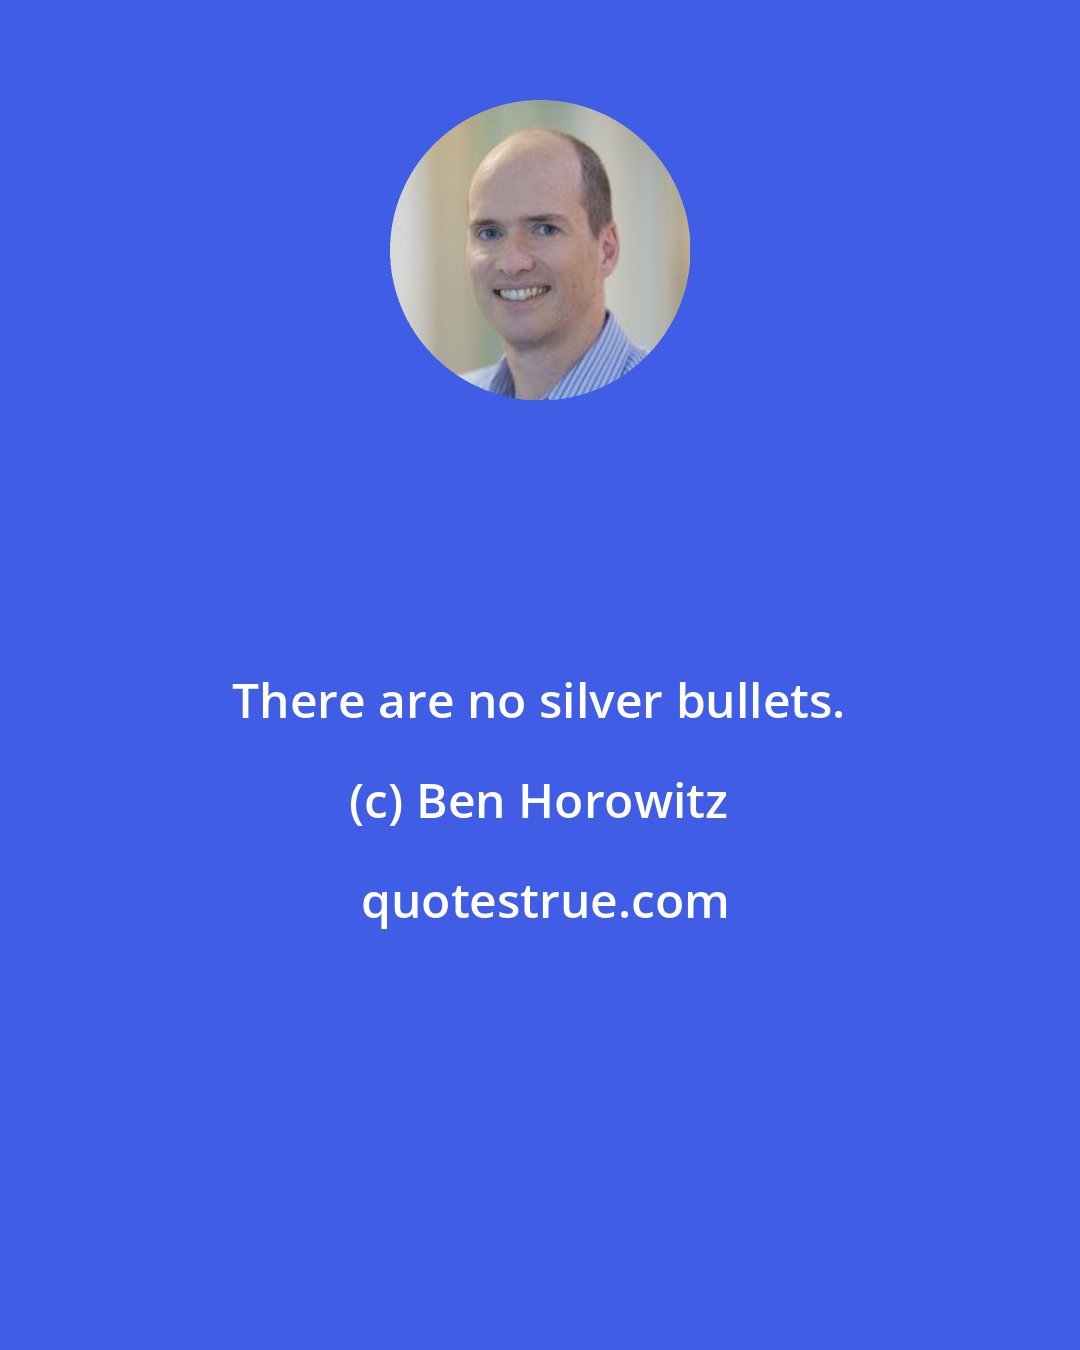 Ben Horowitz: There are no silver bullets.